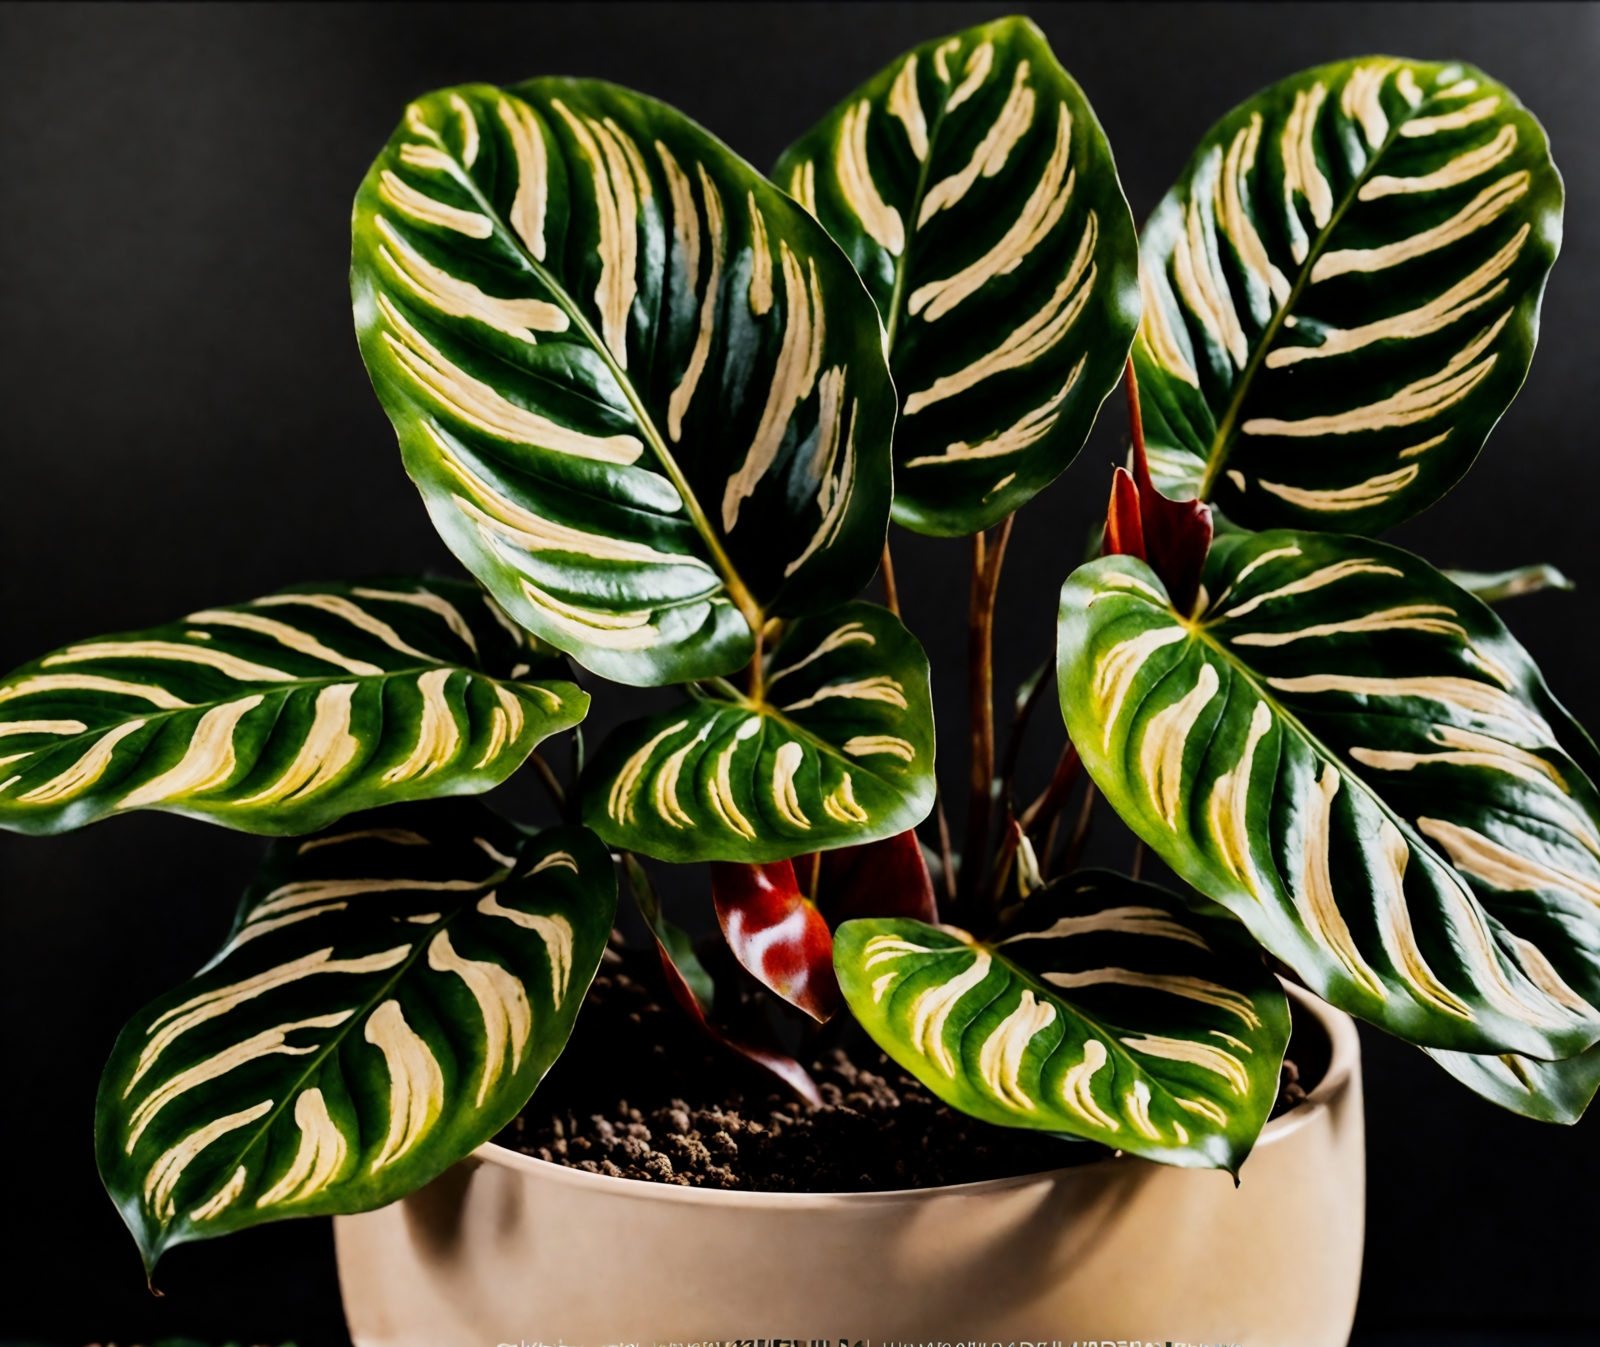 Goeppertia makoyana (prayer plant) with patterned leaves in a bowl, clear indoor lighting, dark background.